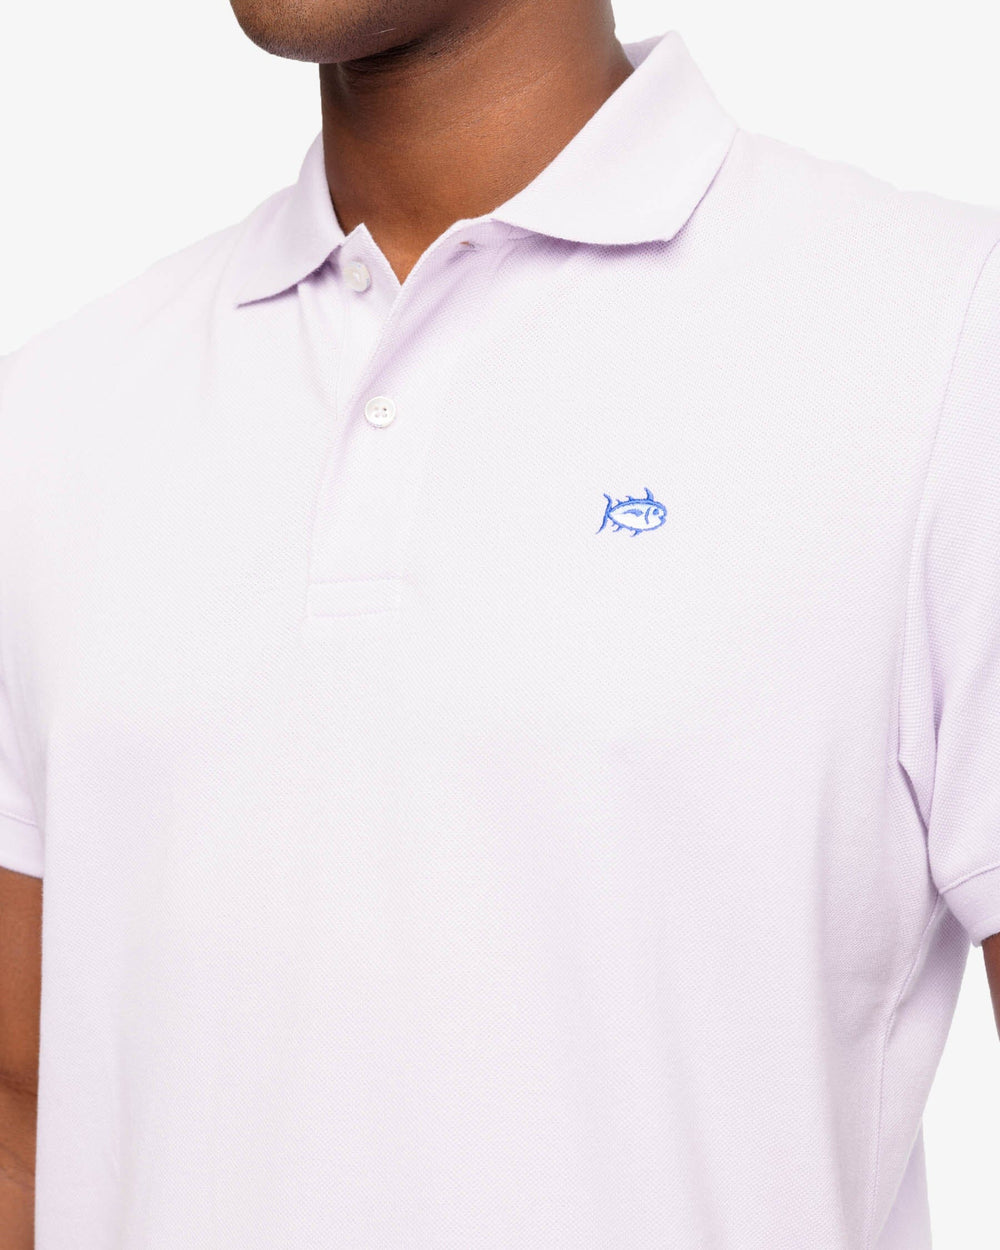 The model detail view of the Men's New Skipjack Polo Shirt by Southern Tide - Orchid Petal